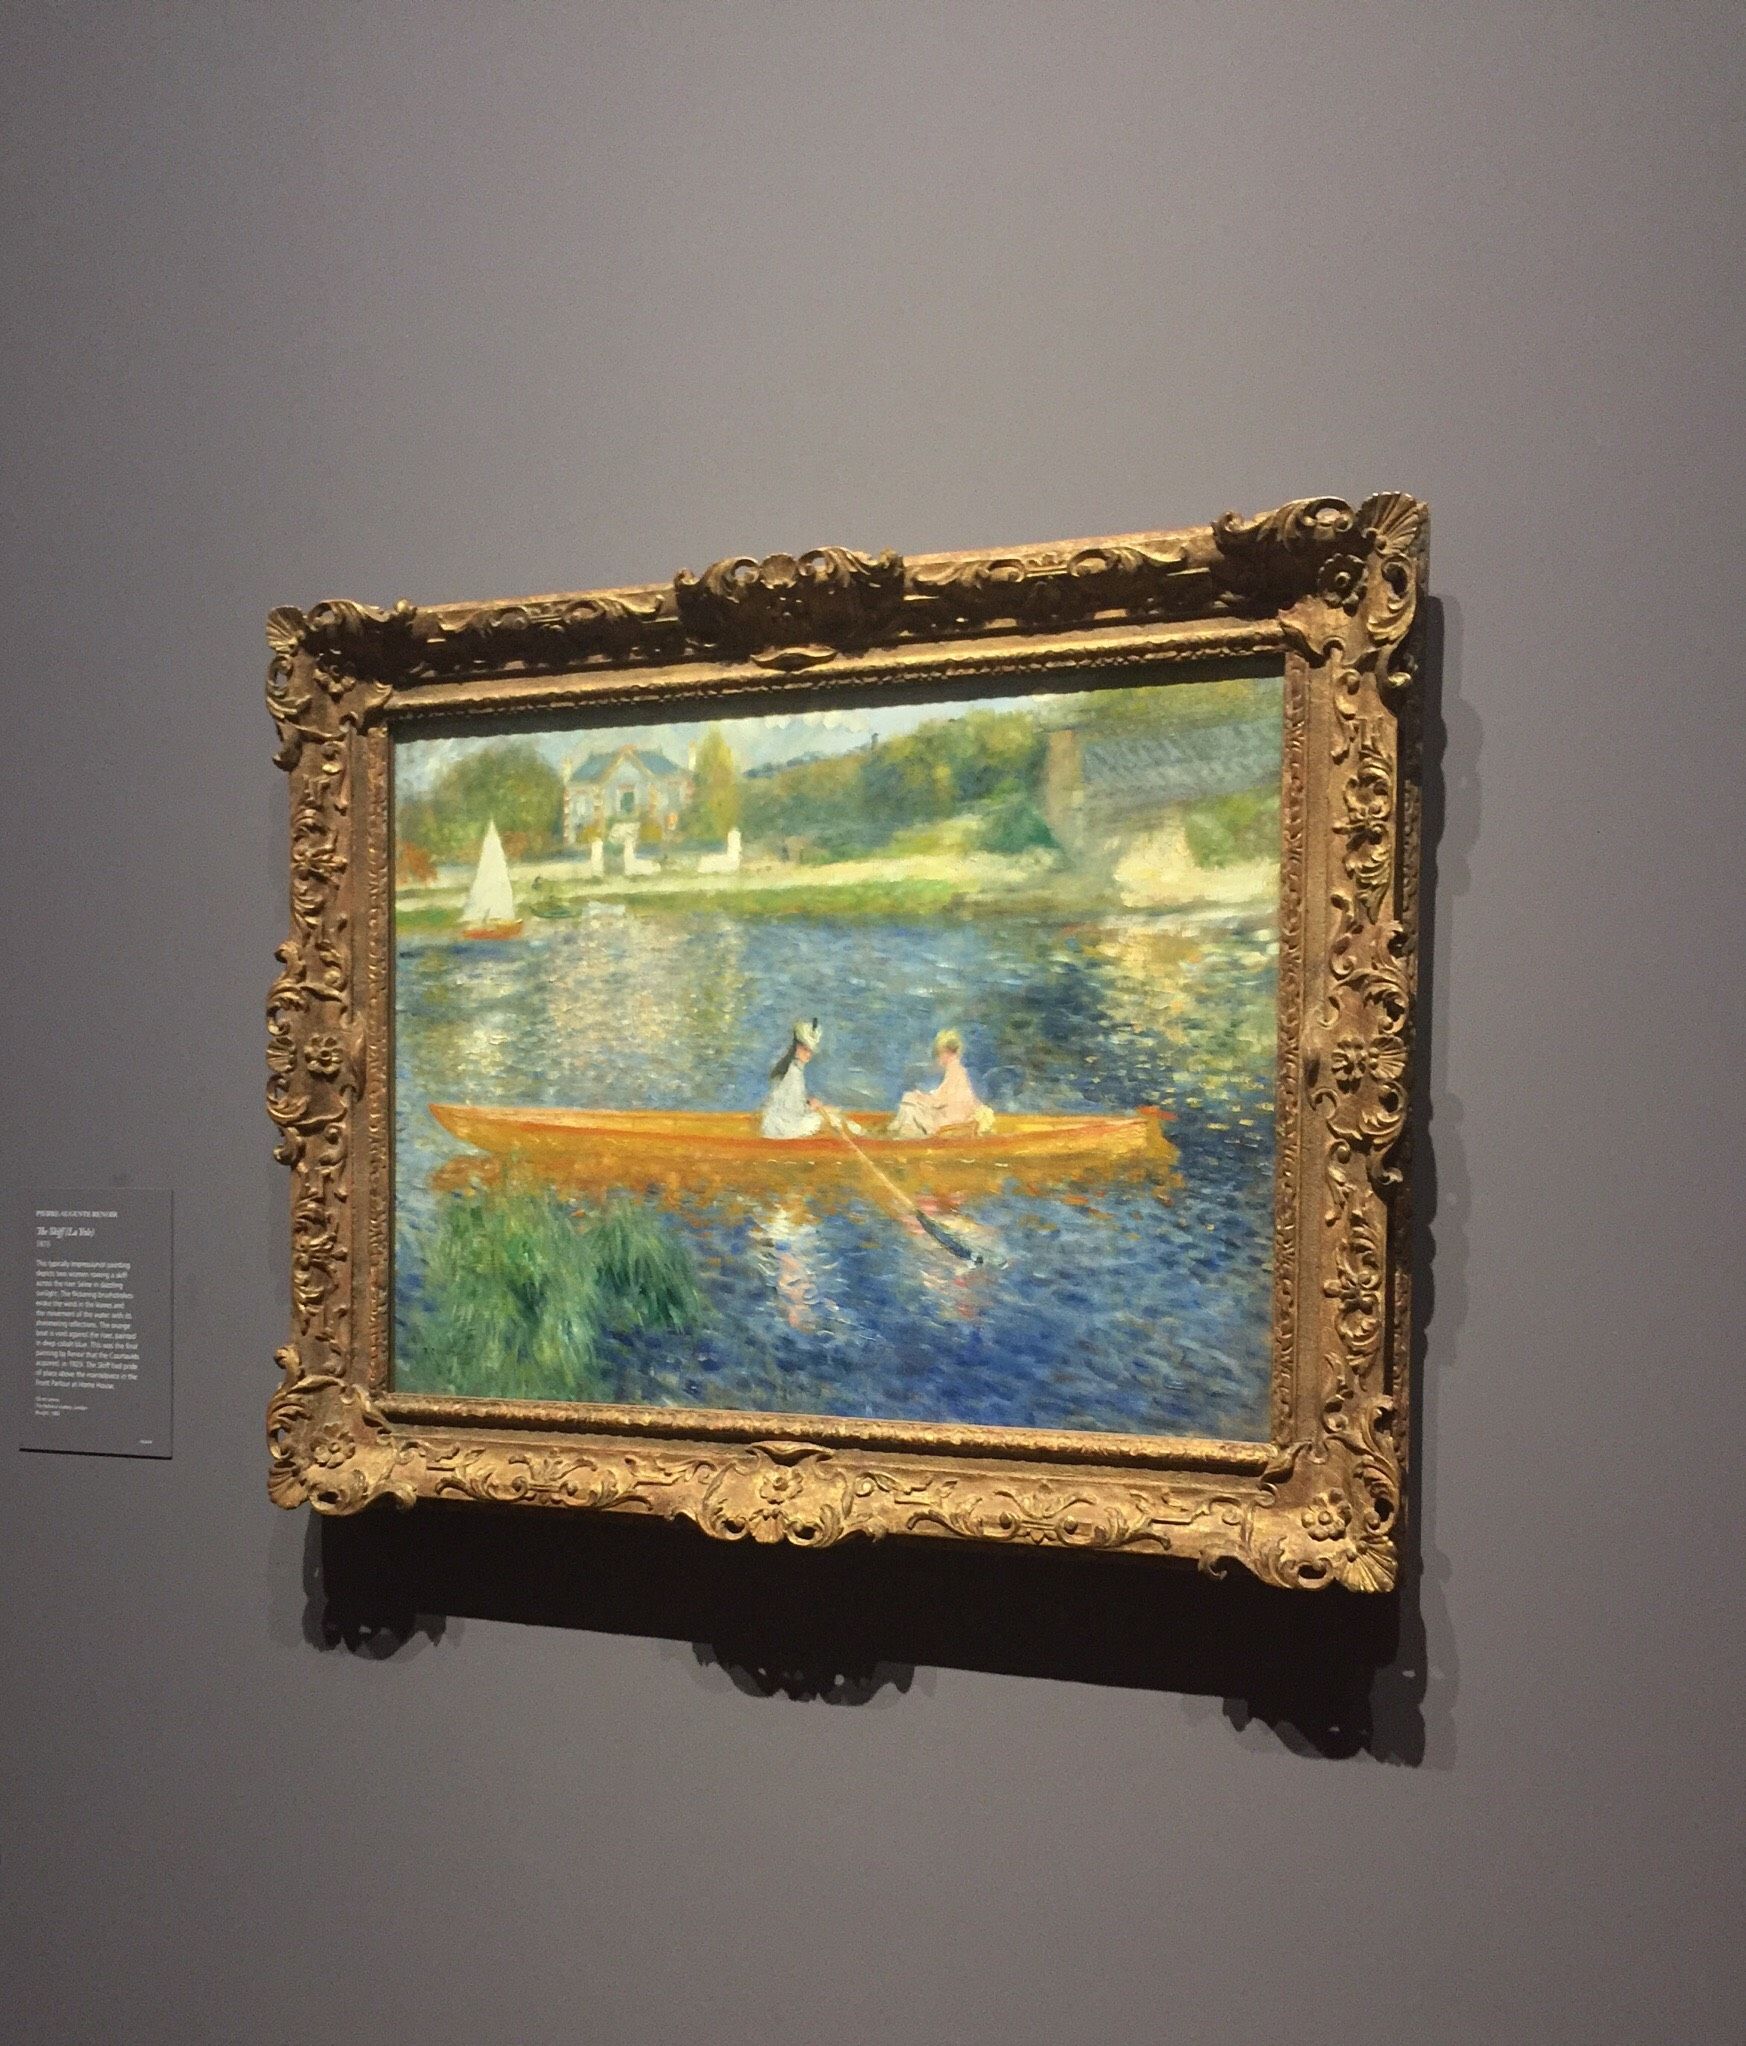 Courtauld Impressionists: from Manet to Cézanne, Exhibition, National Gallery, London, 17 Sep 2018-20 Jan 2019